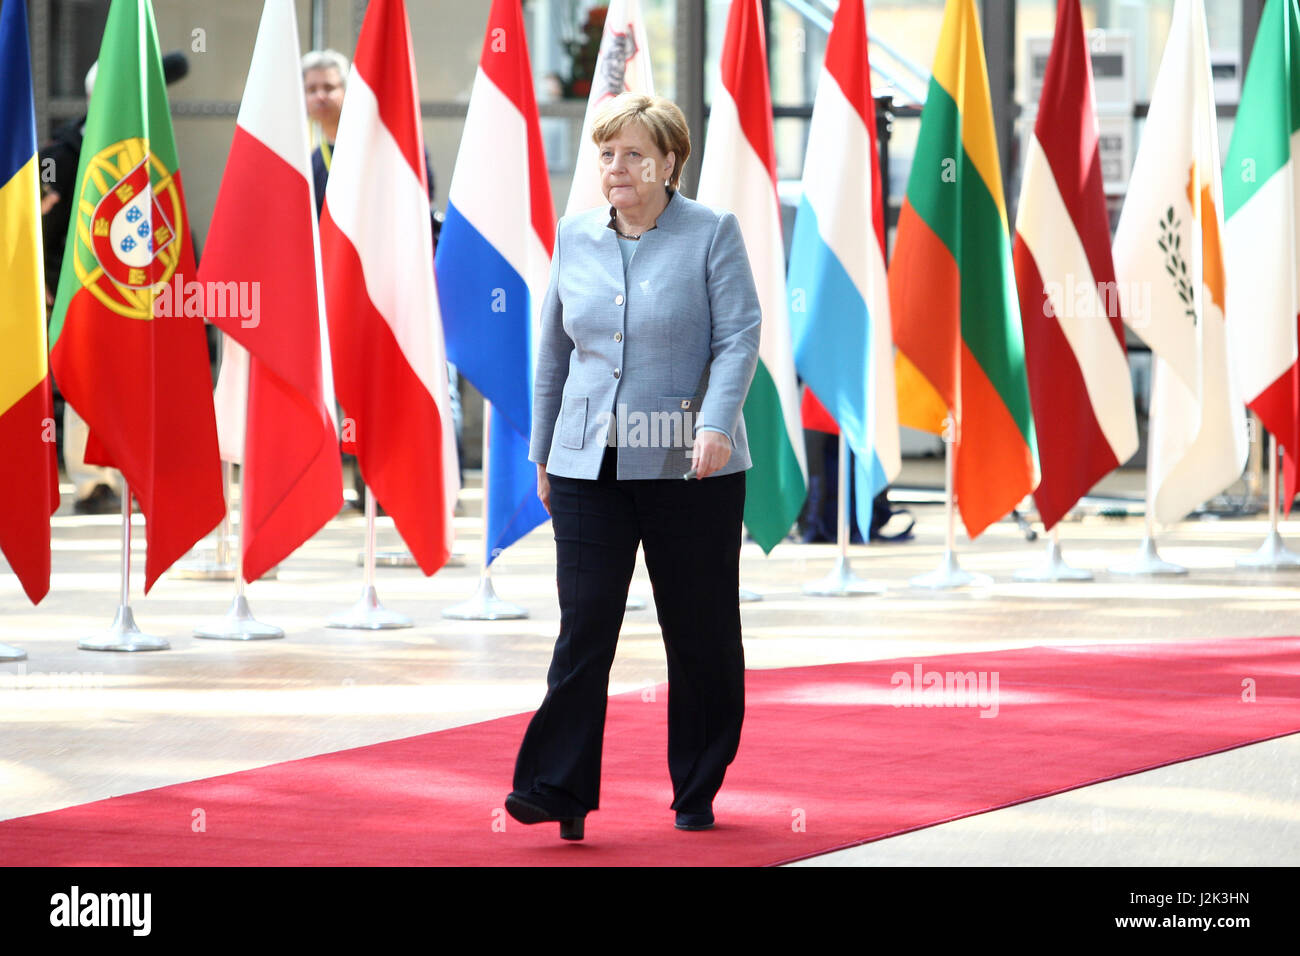 Brussels, Belgium. 29th Apr, 2017. Special Meeting European Council (ART.50) Brexit, entry of Federal Chancellor Angela Merkel Credit: Leo Cavallo/Alamy Live News Stock Photo